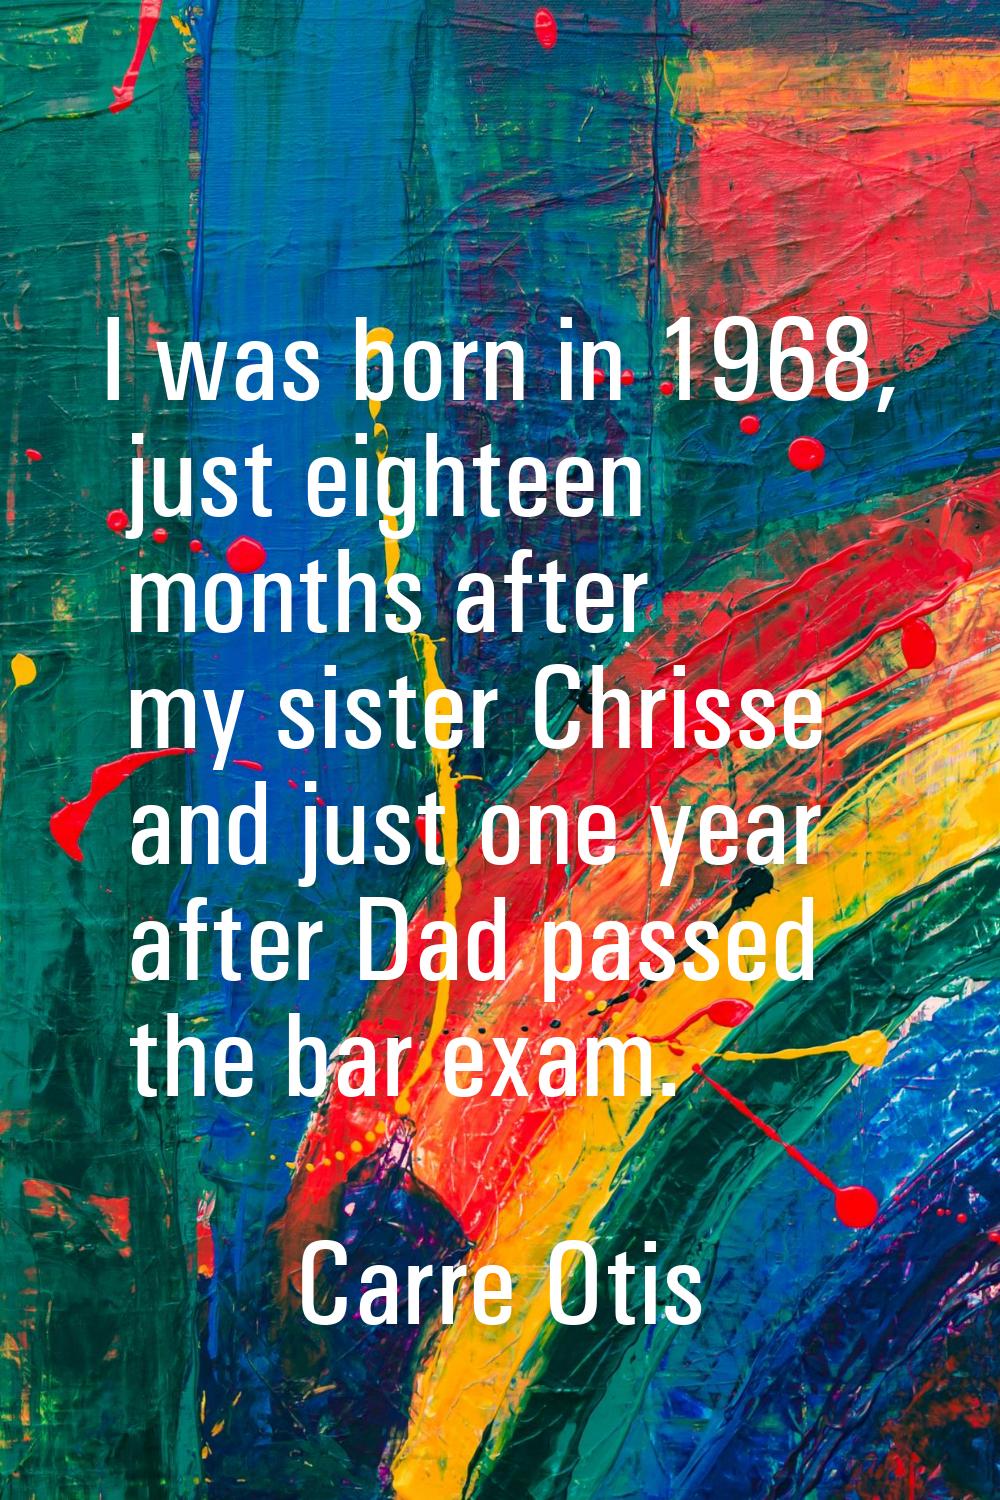 I was born in 1968, just eighteen months after my sister Chrisse and just one year after Dad passed